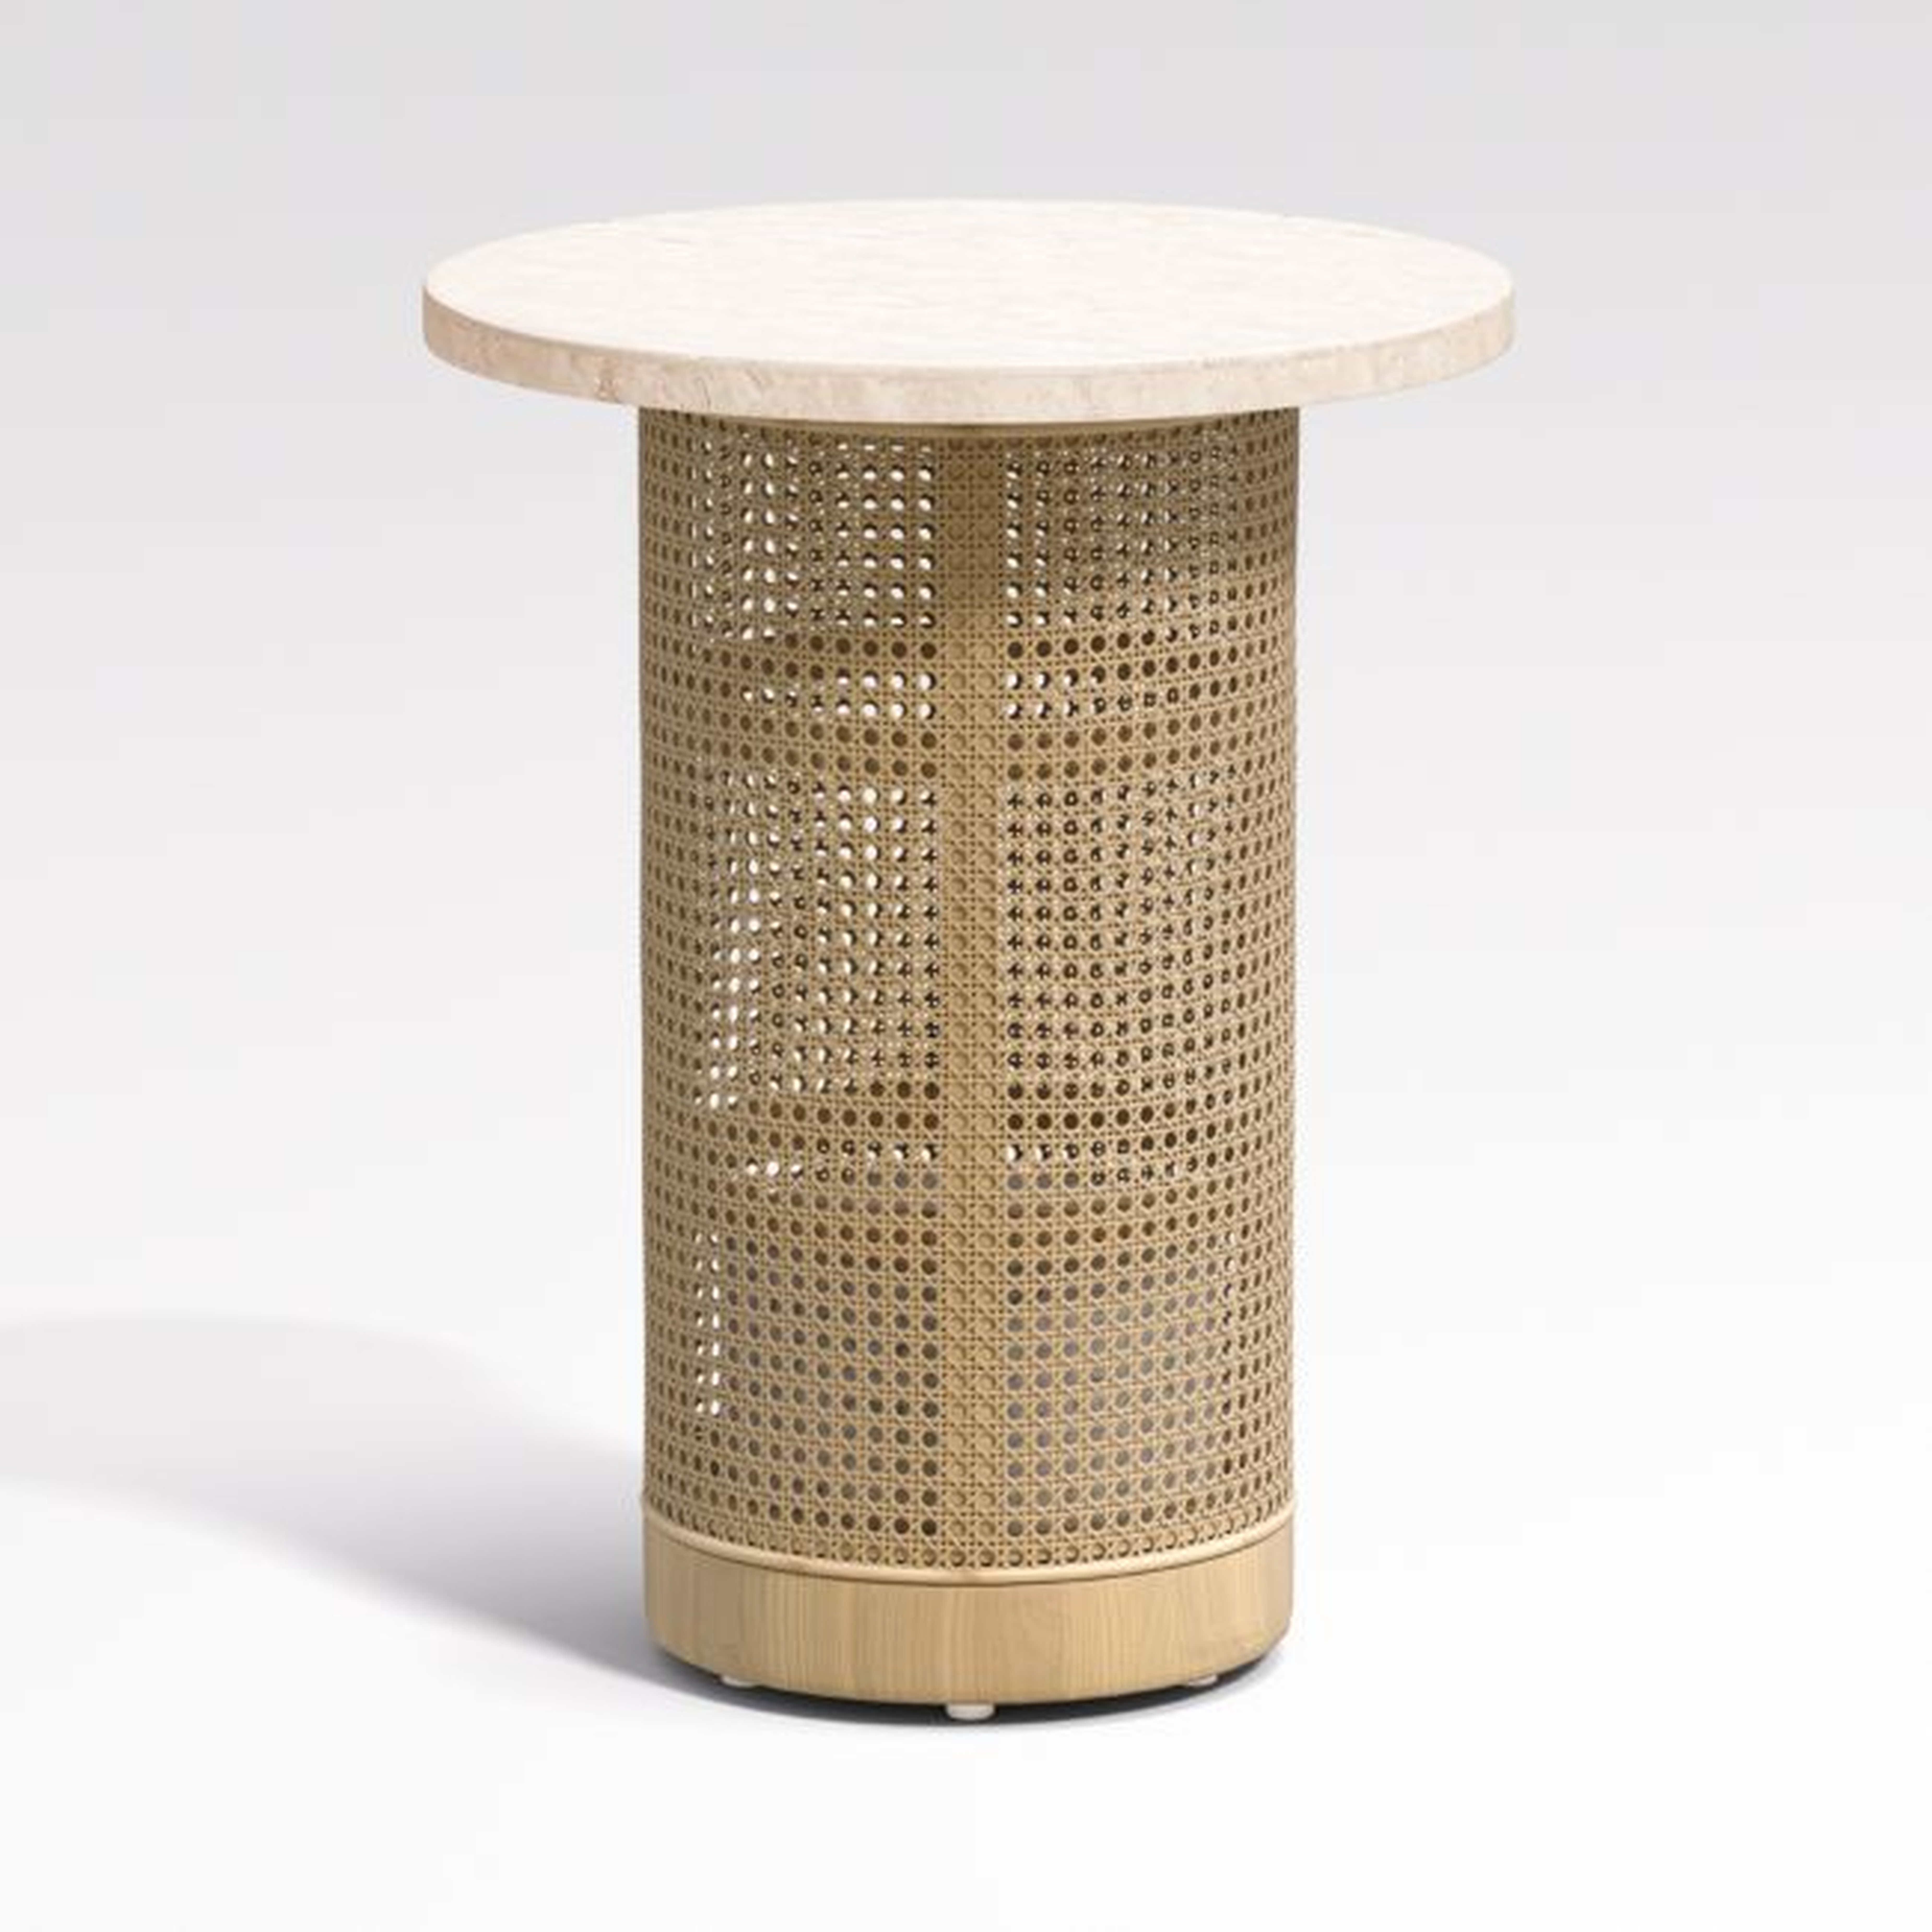 Vernet Travertine Cane Round End Table - Crate and Barrel